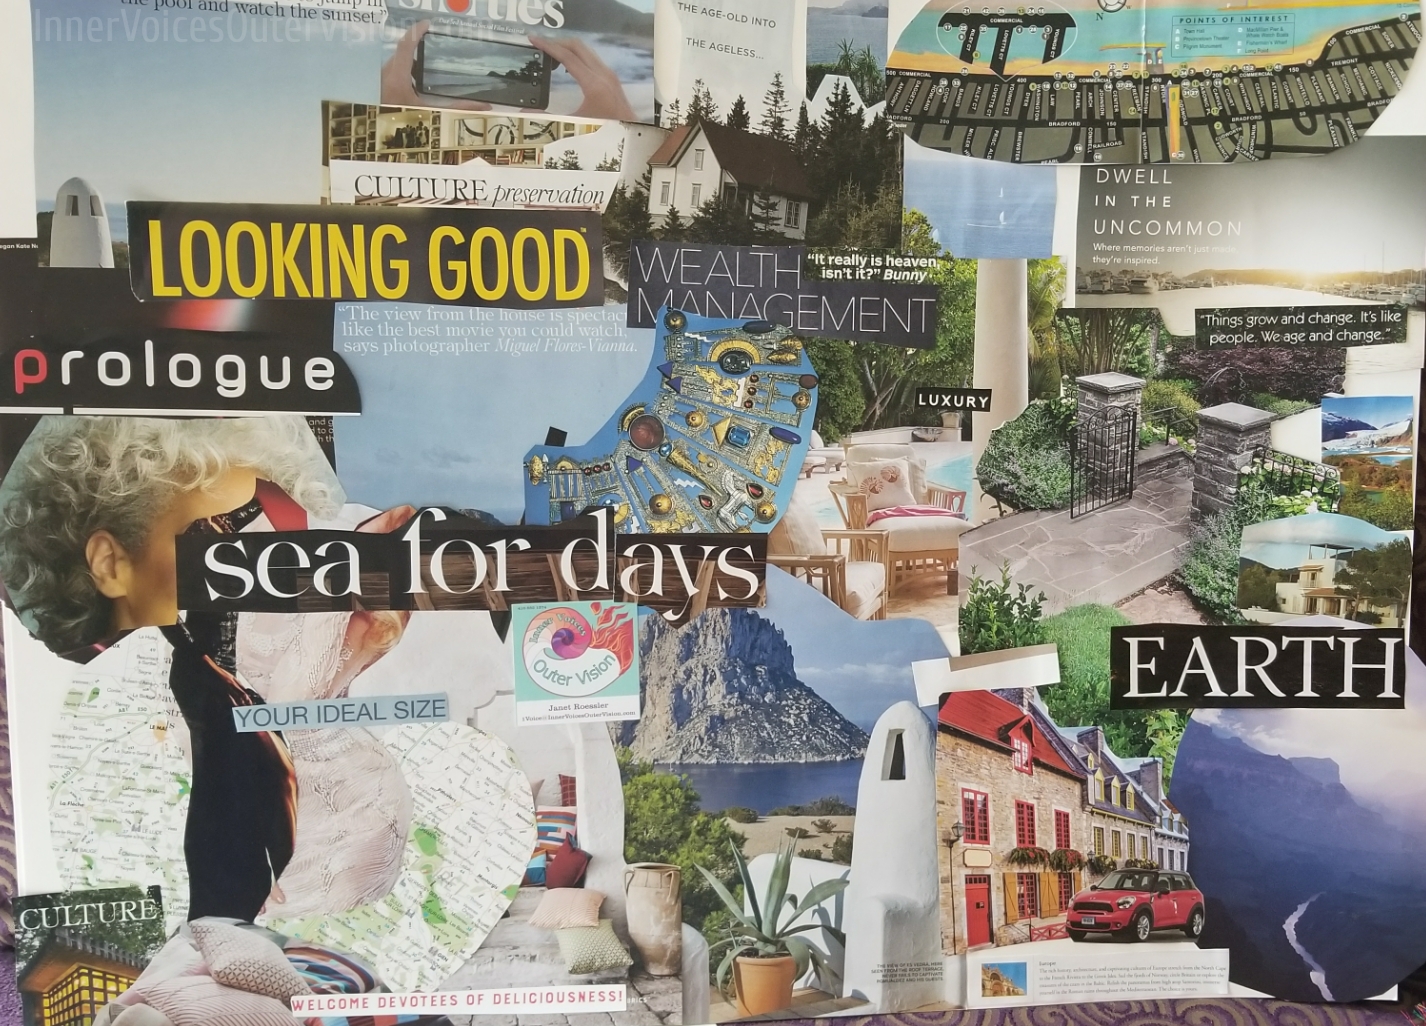 Update to the Vision Board Exploration Workshop – Inner Voices Outer Vision